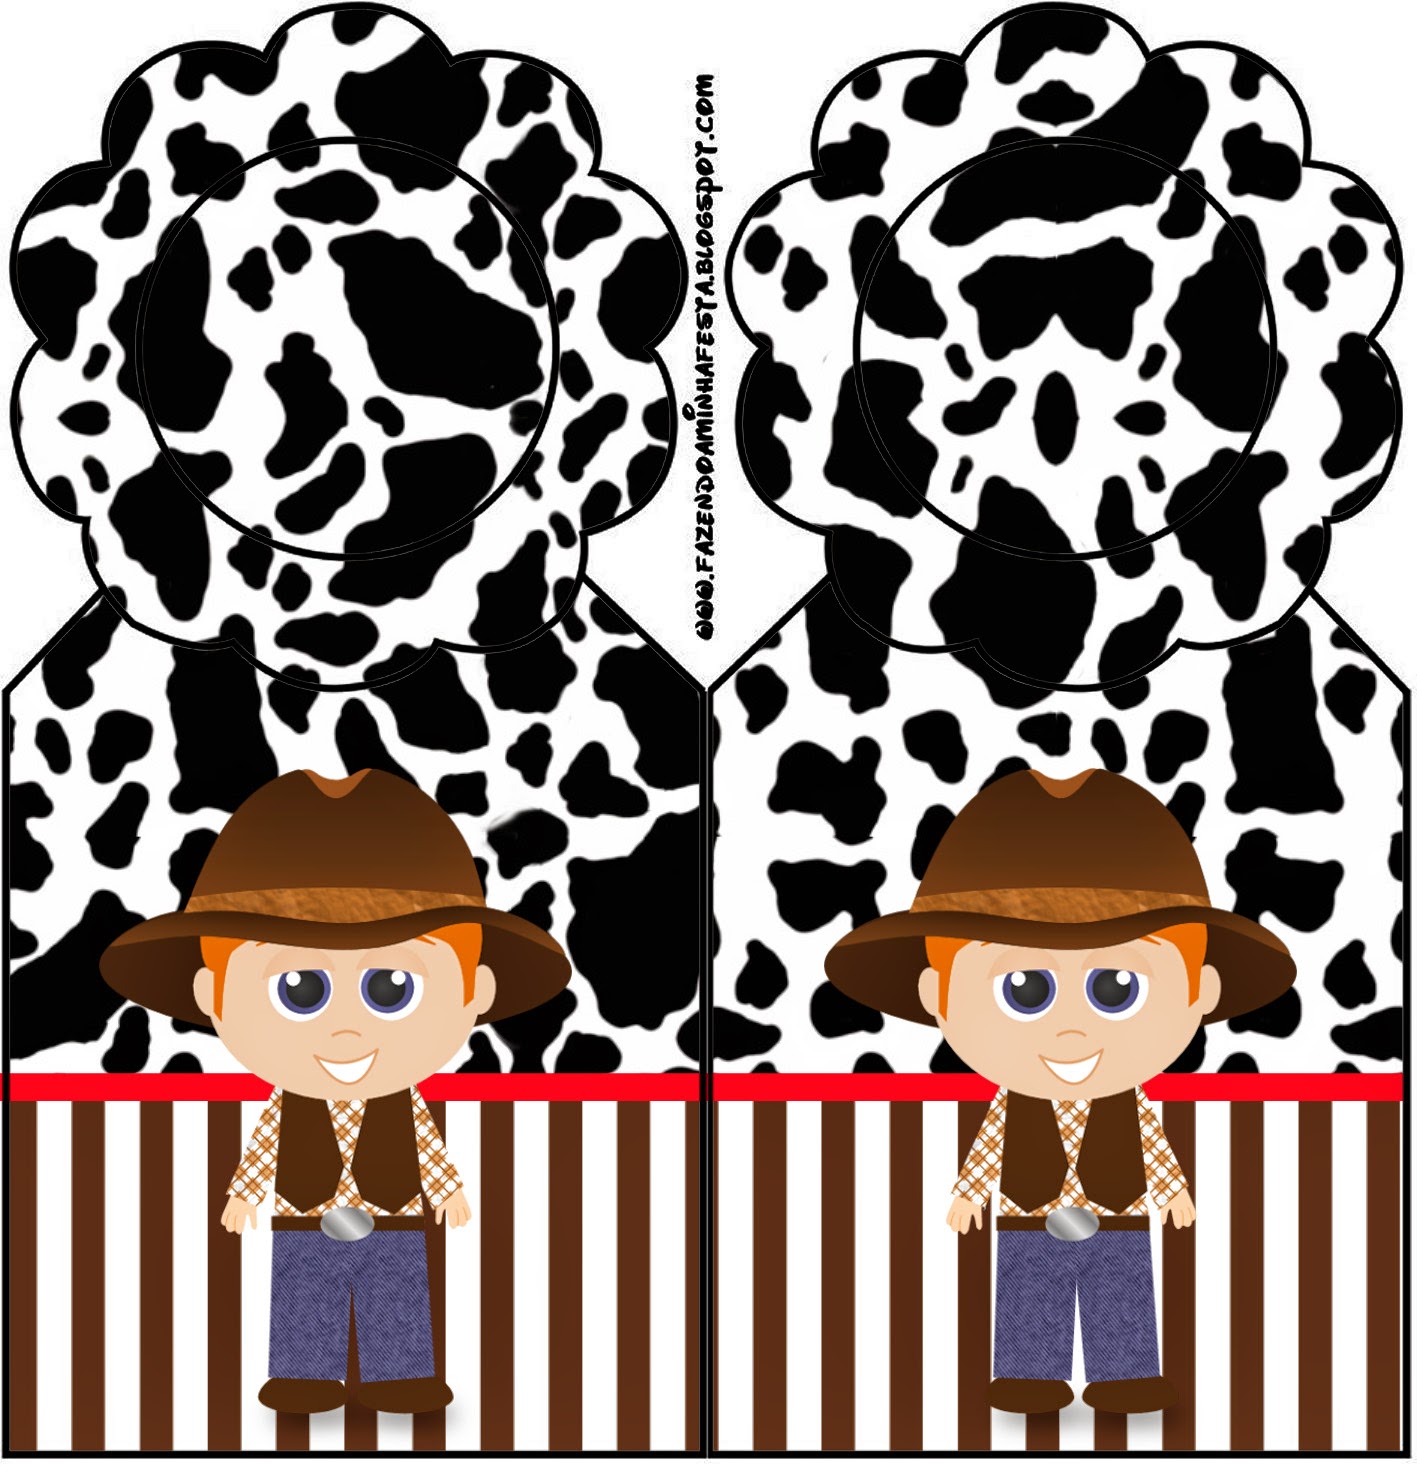 Cowboy or Western Party Free Party Printables. Oh My Fiesta! in english